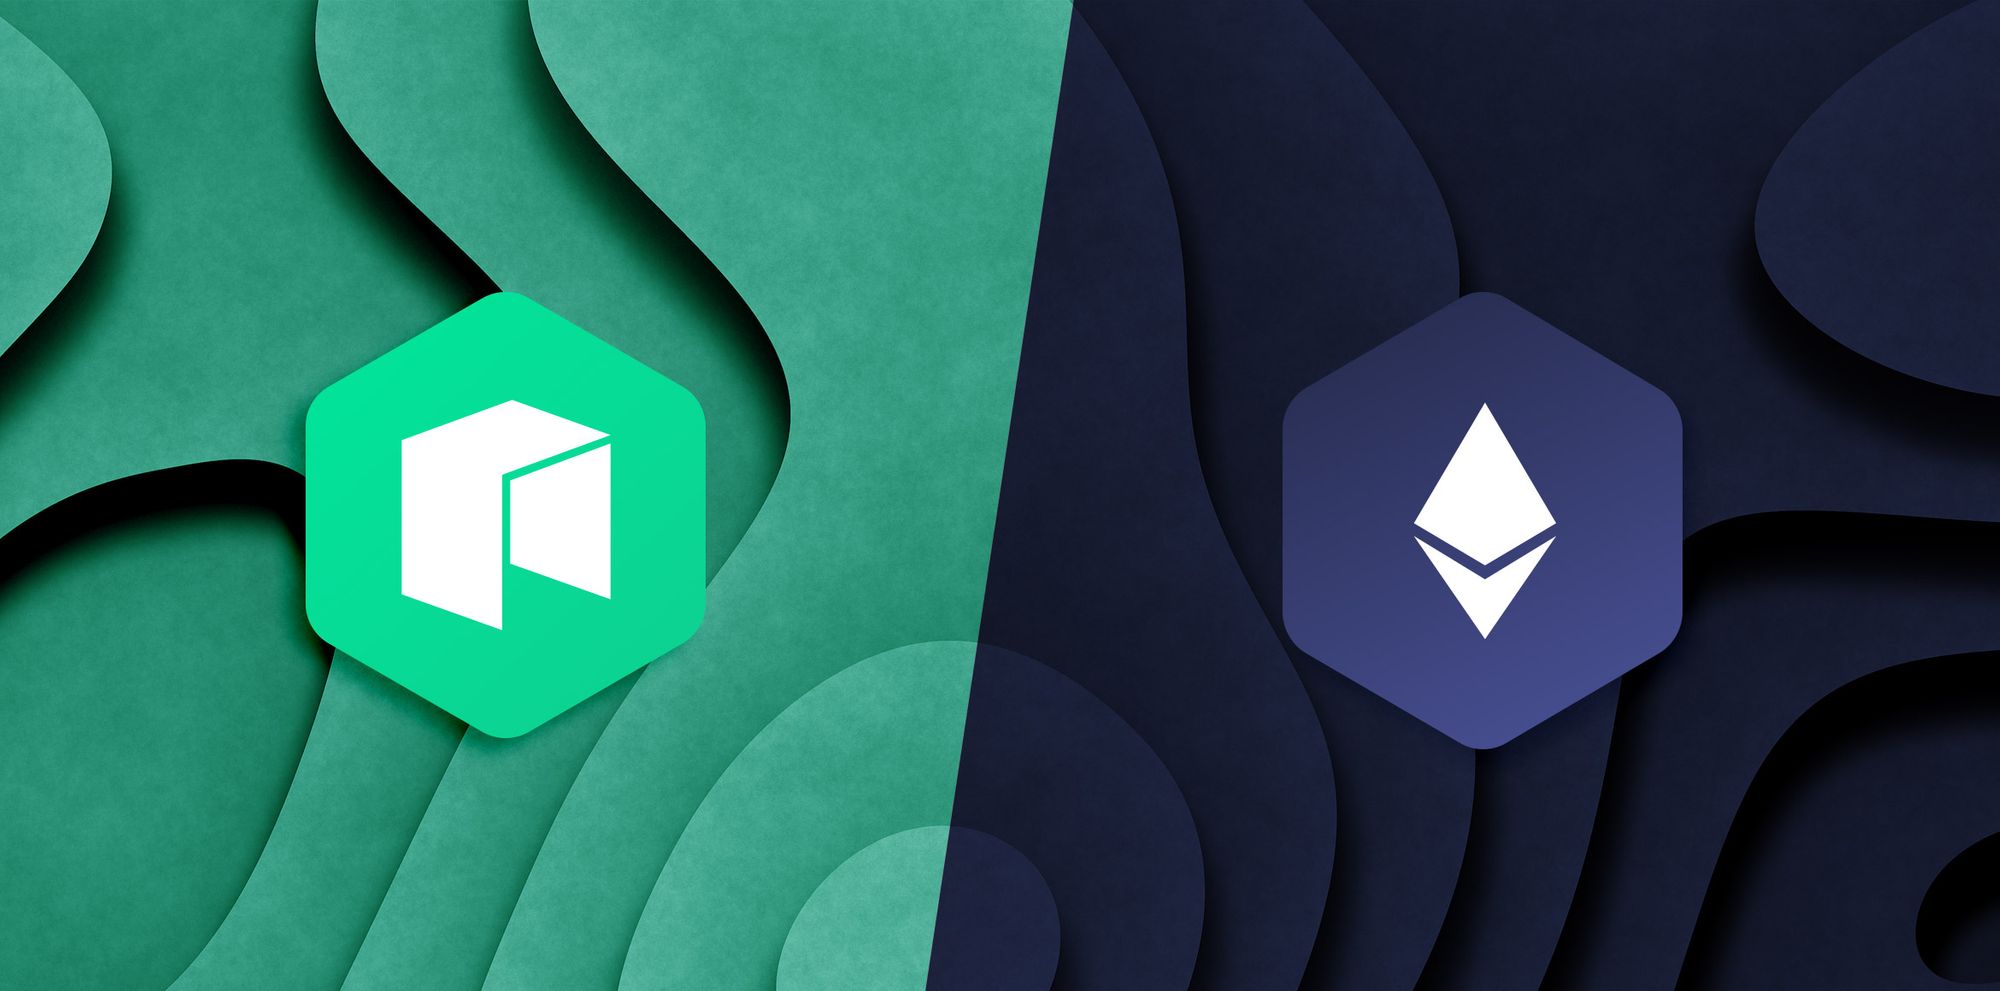 NEO vs. Ethereum: Battle of the Smart Contracts Platforms